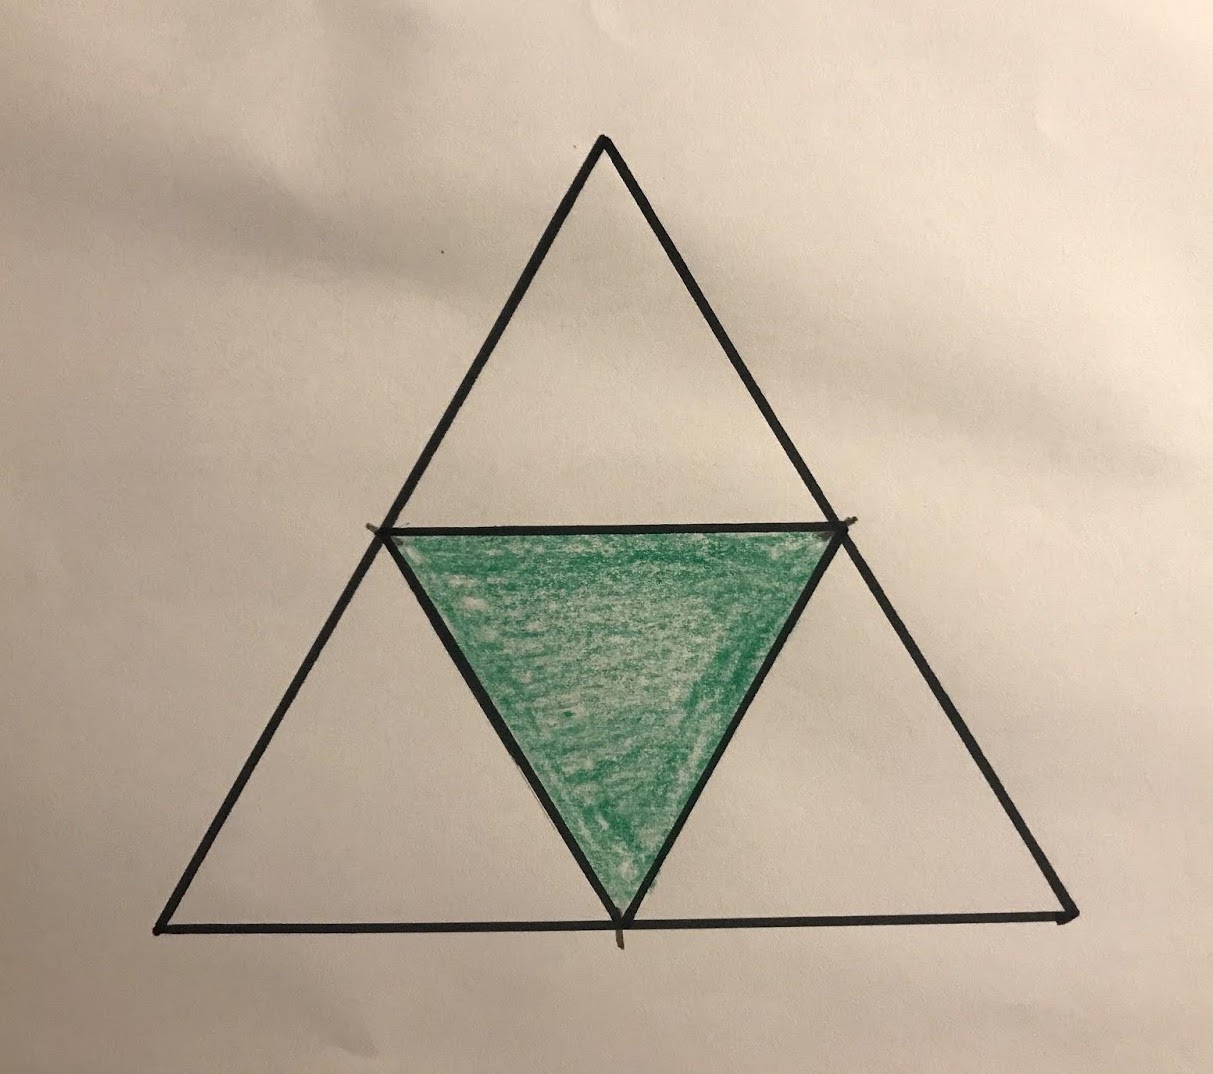 An equilateral triangle with a smaller, downward pointing green triangle contained inside.